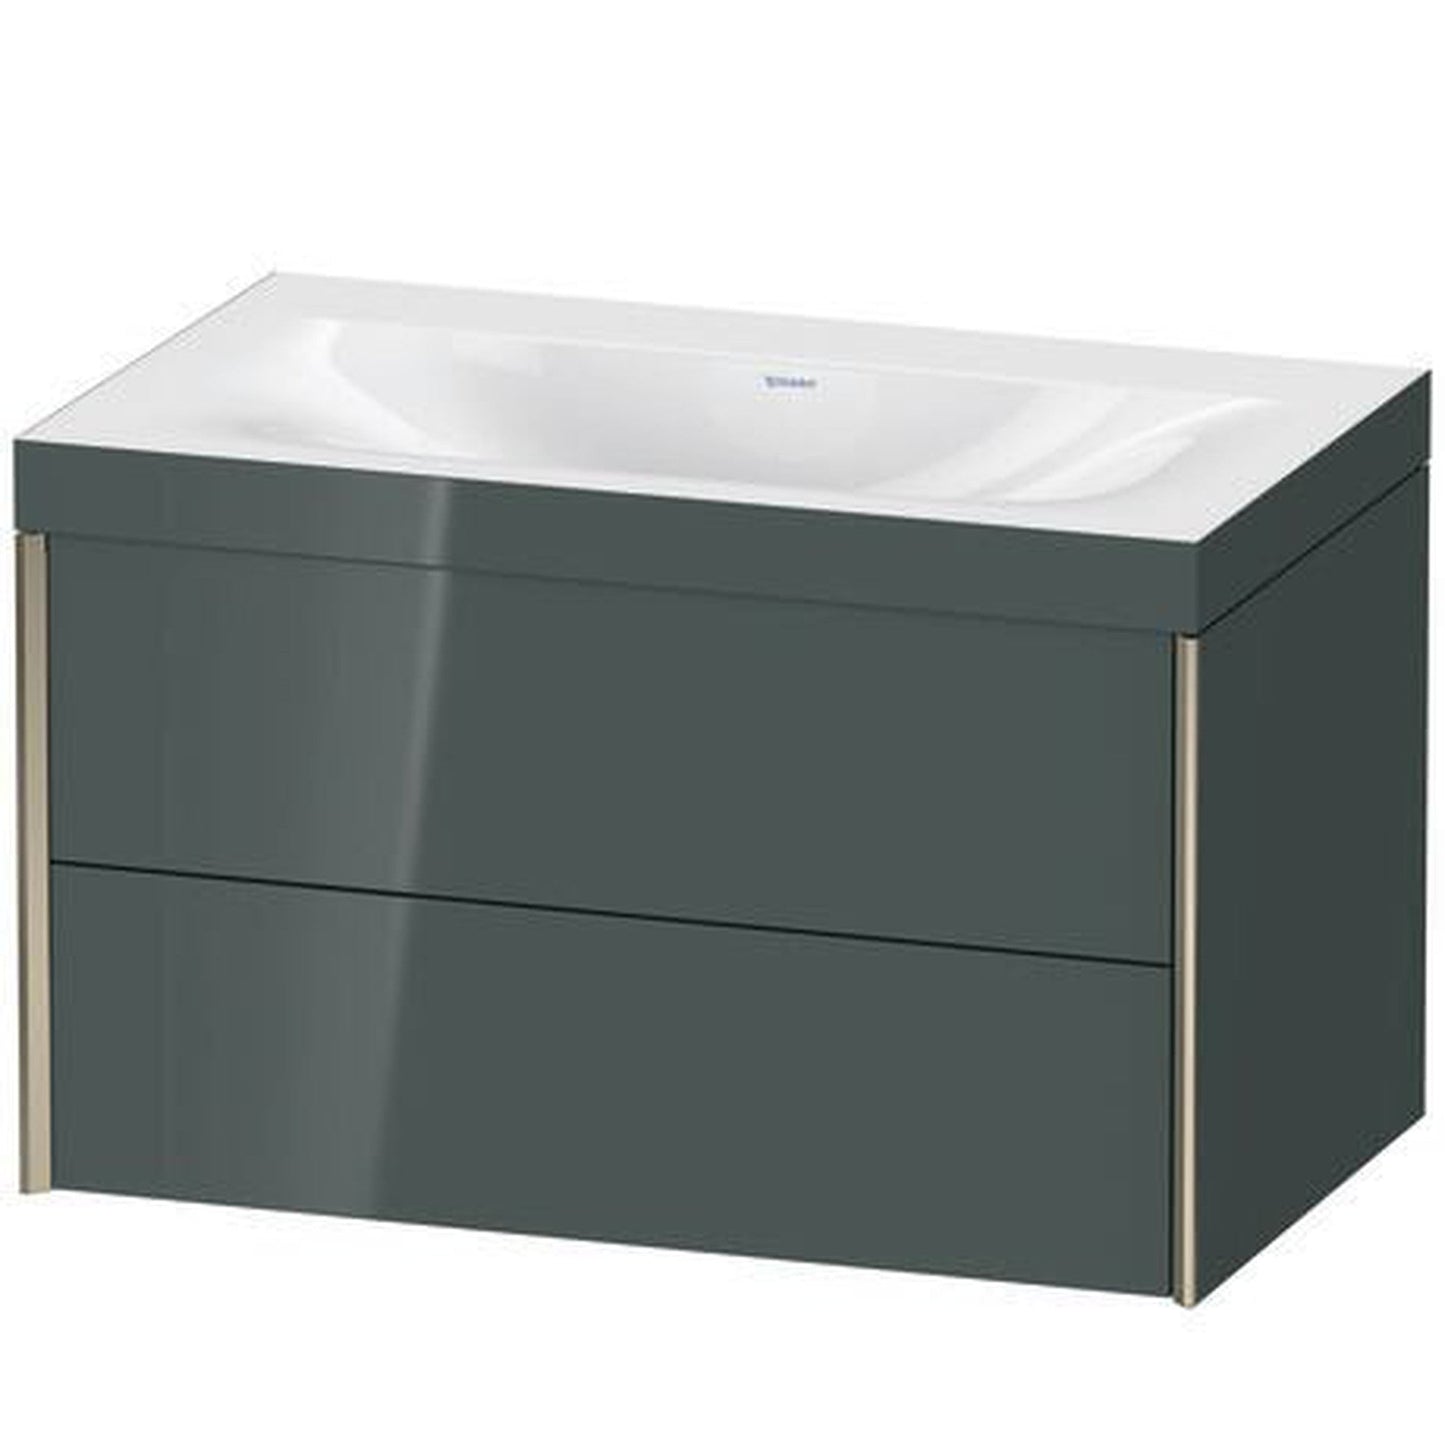 Duravit Xviu 31" x 20" x 19" Two Drawer C-Bonded Wall-Mount Vanity Kit Without Tap Hole, Dolomite Gray (XV4615NB138C)